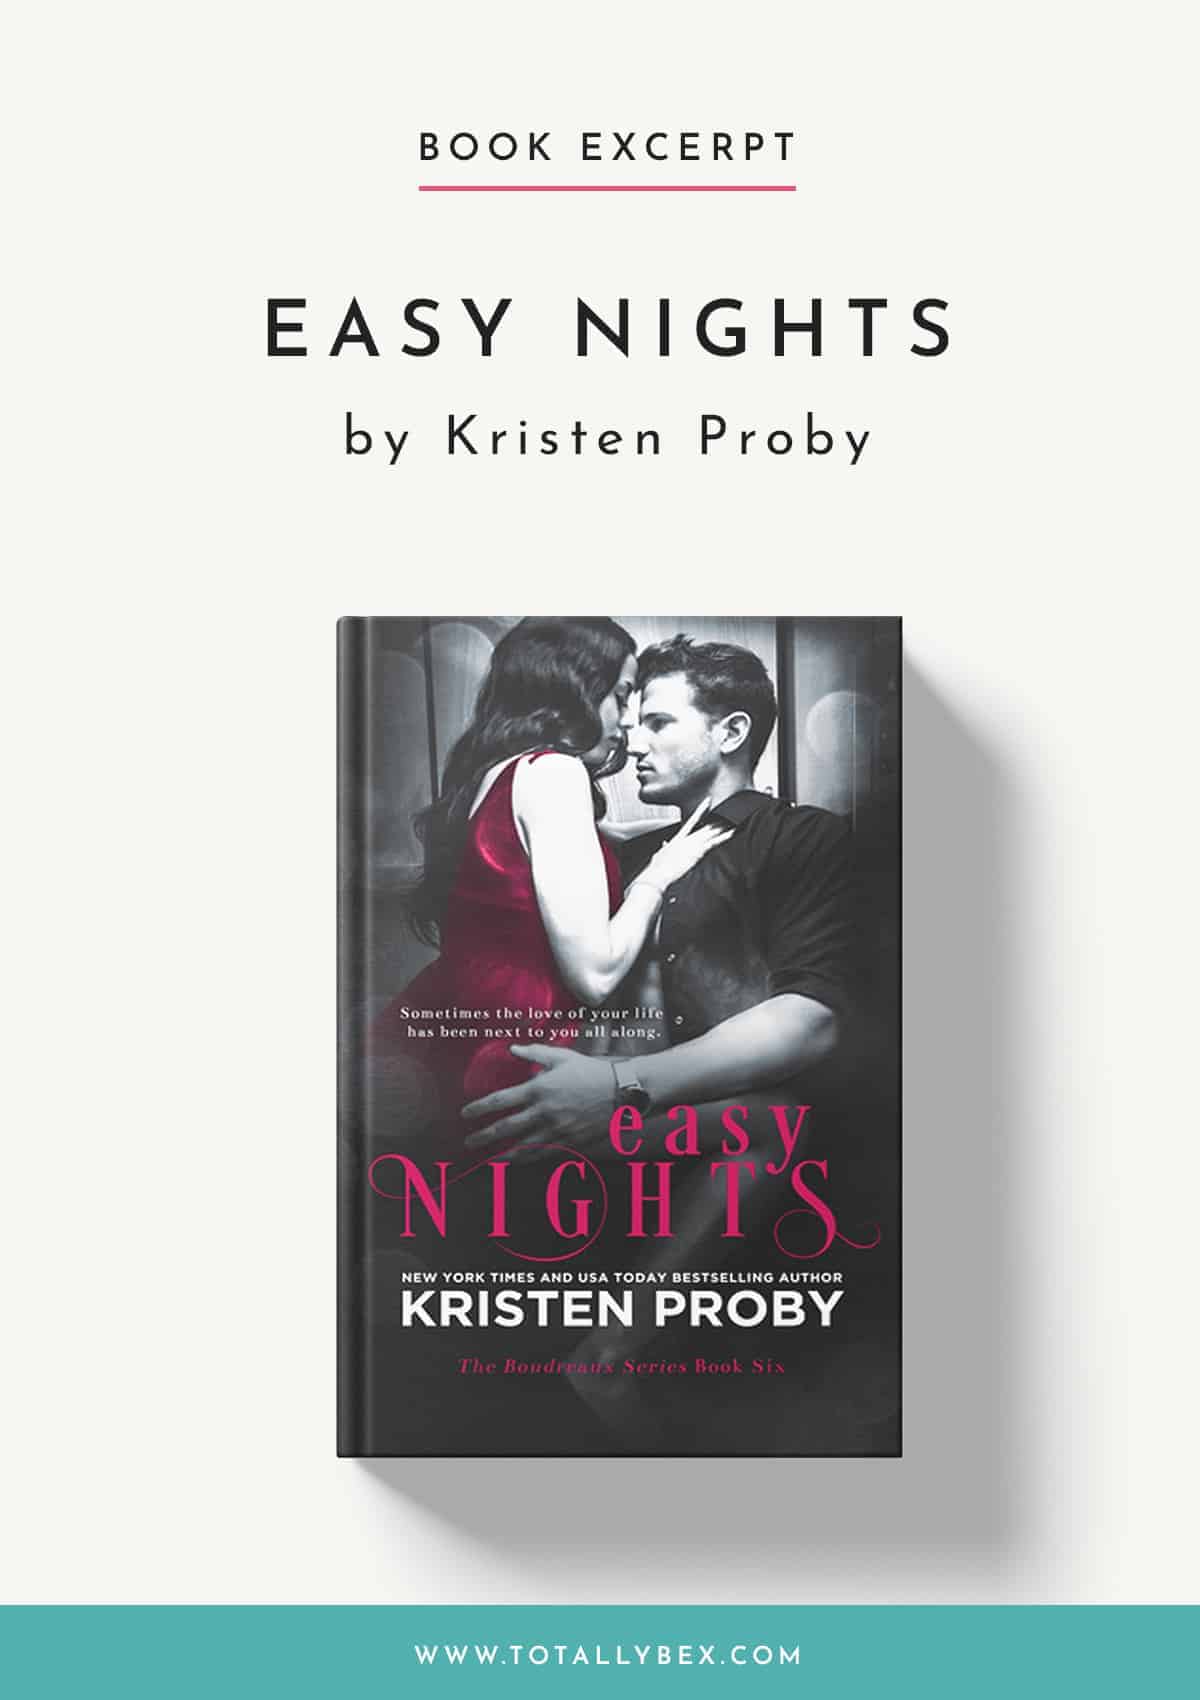 Easy Nights by Kristen Proby-Book Excerpt